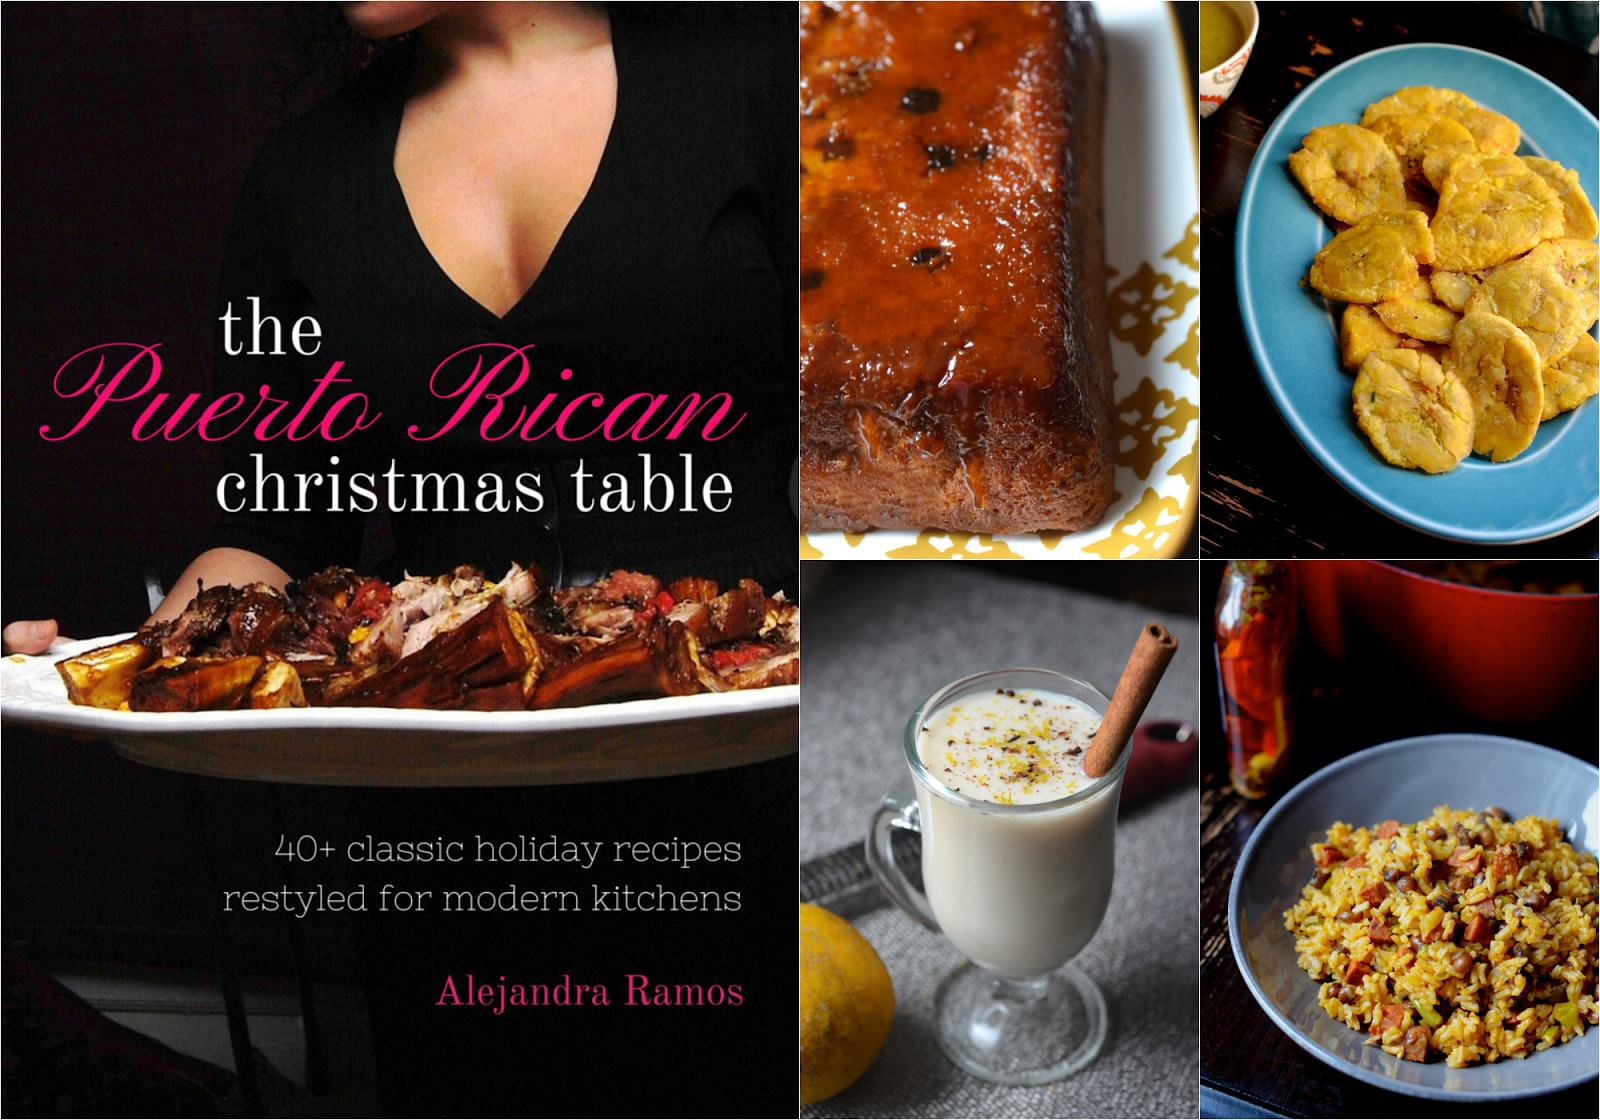 The Puerto Rican Christmas Table eCookbook